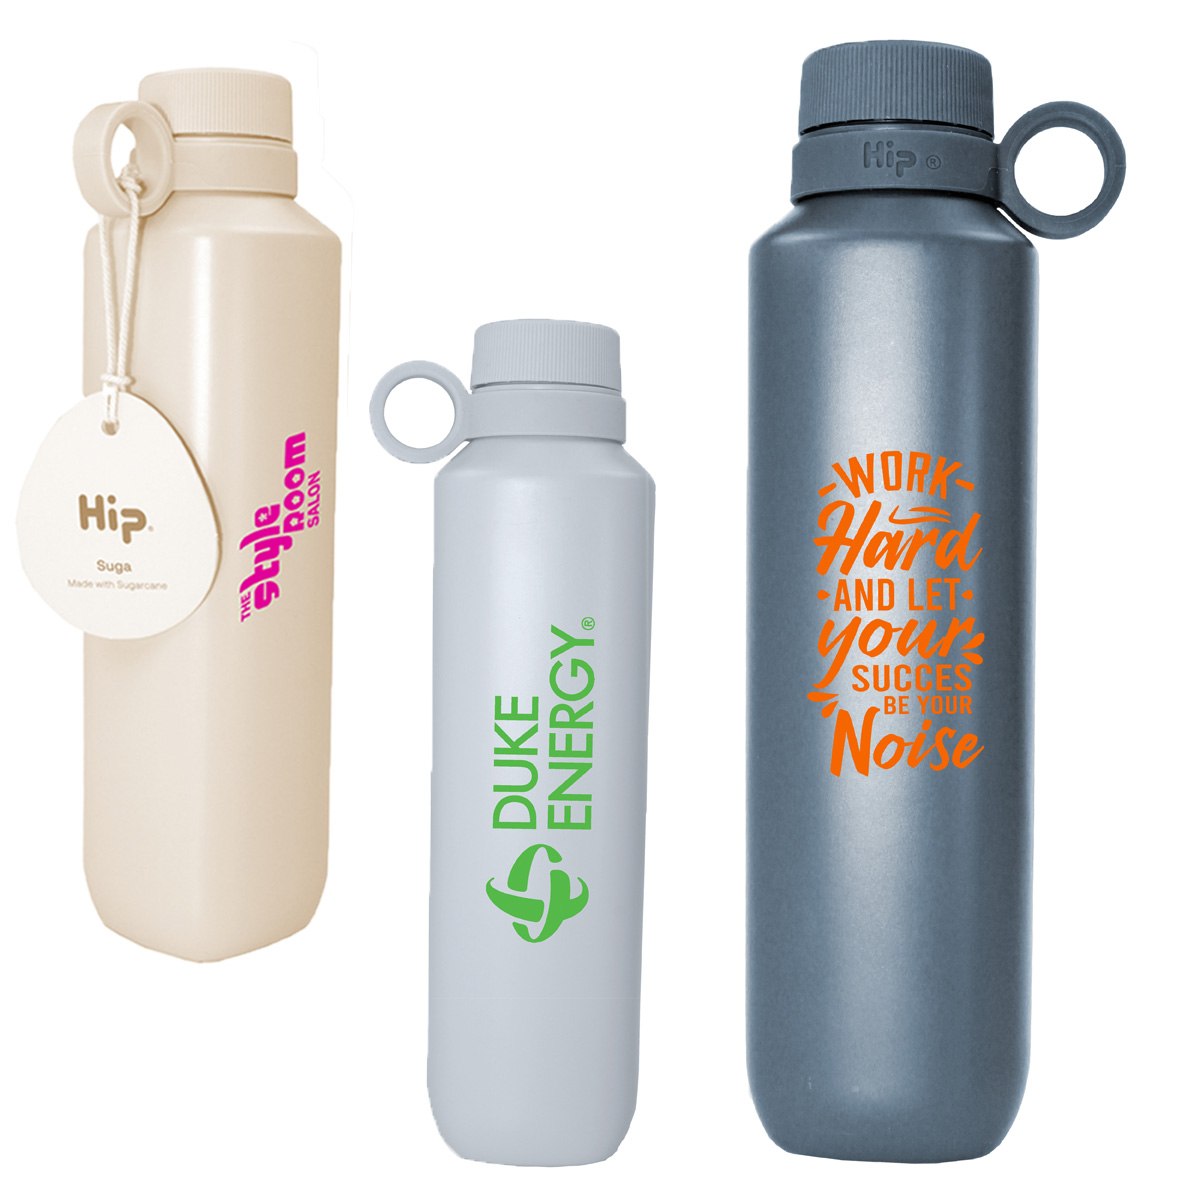 HIP® Recycled Sugar Cane Water Bottle | Reusable | 22oz